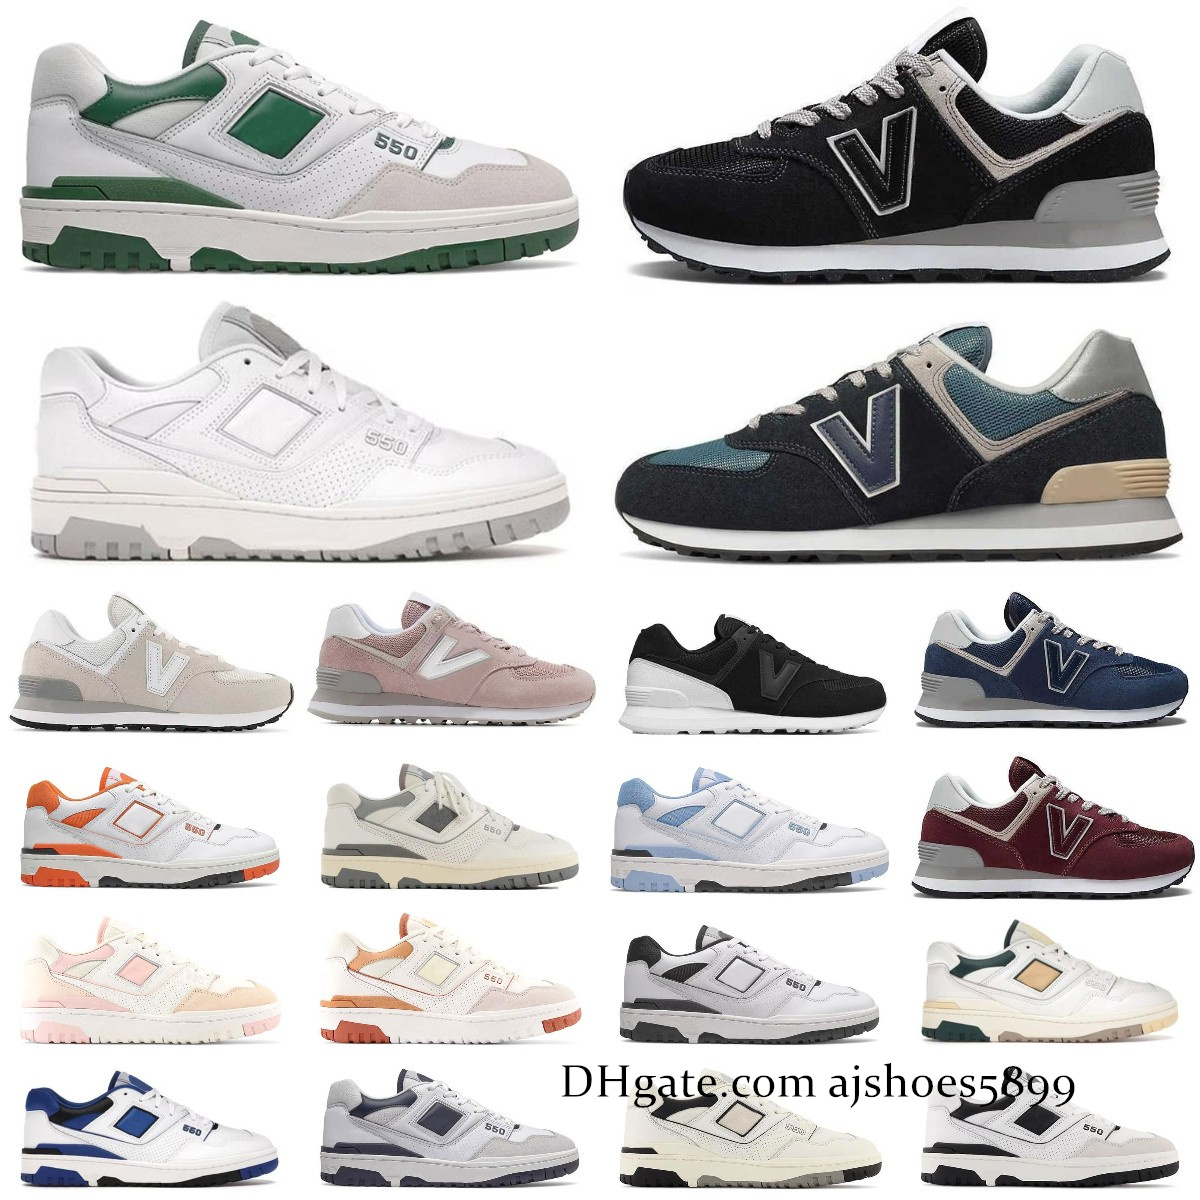 

casual shoes new 550 574 White Green Grey Cream Black Blue UNC Shadow Discount Burgundy Designers New Bb550 B550 b574 for Mens Women 550s Outdoor Sports Sneakers, Box